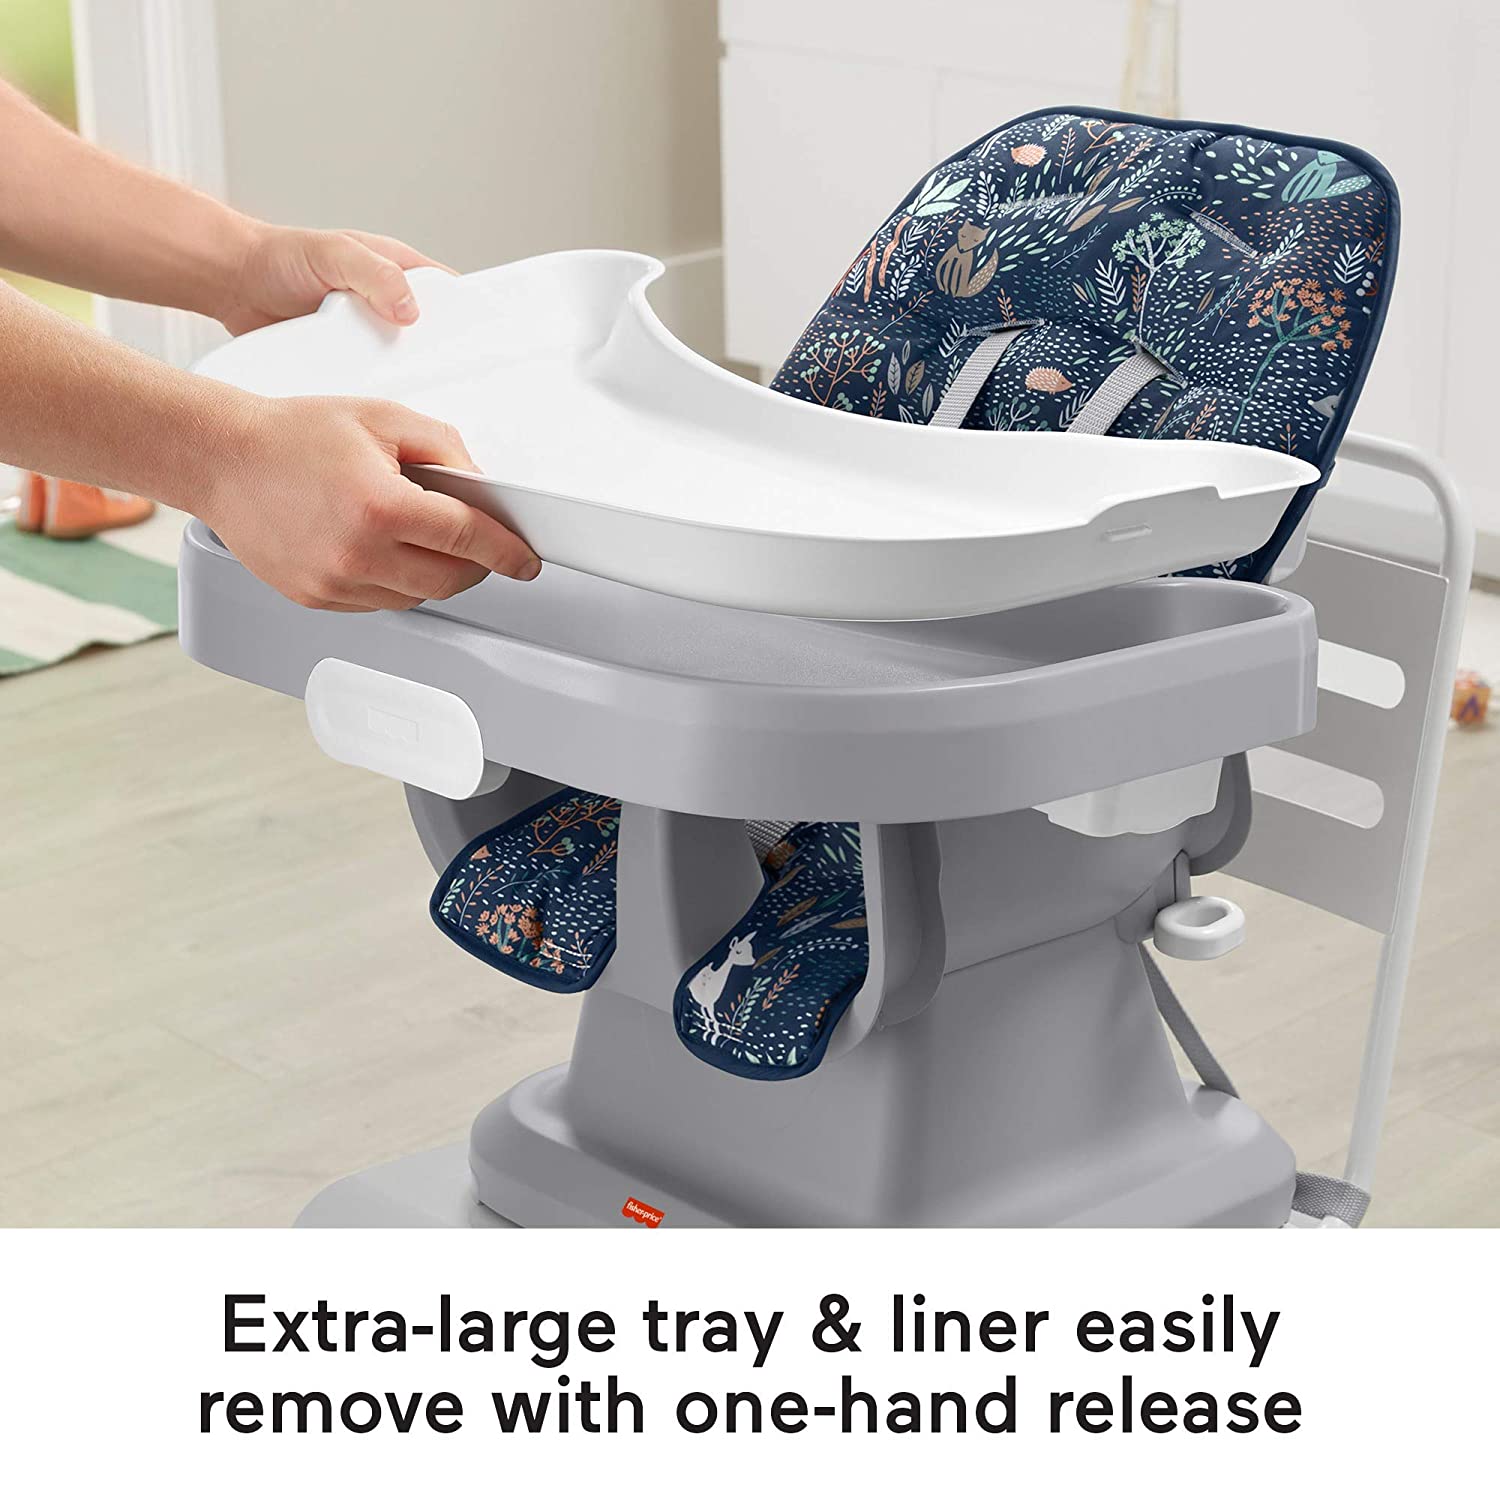 Fisher-Price SpaceSaver Simple Clean High Chair, Moonlight Forest -  Portable for Baby-to-Toddler Dining Chair